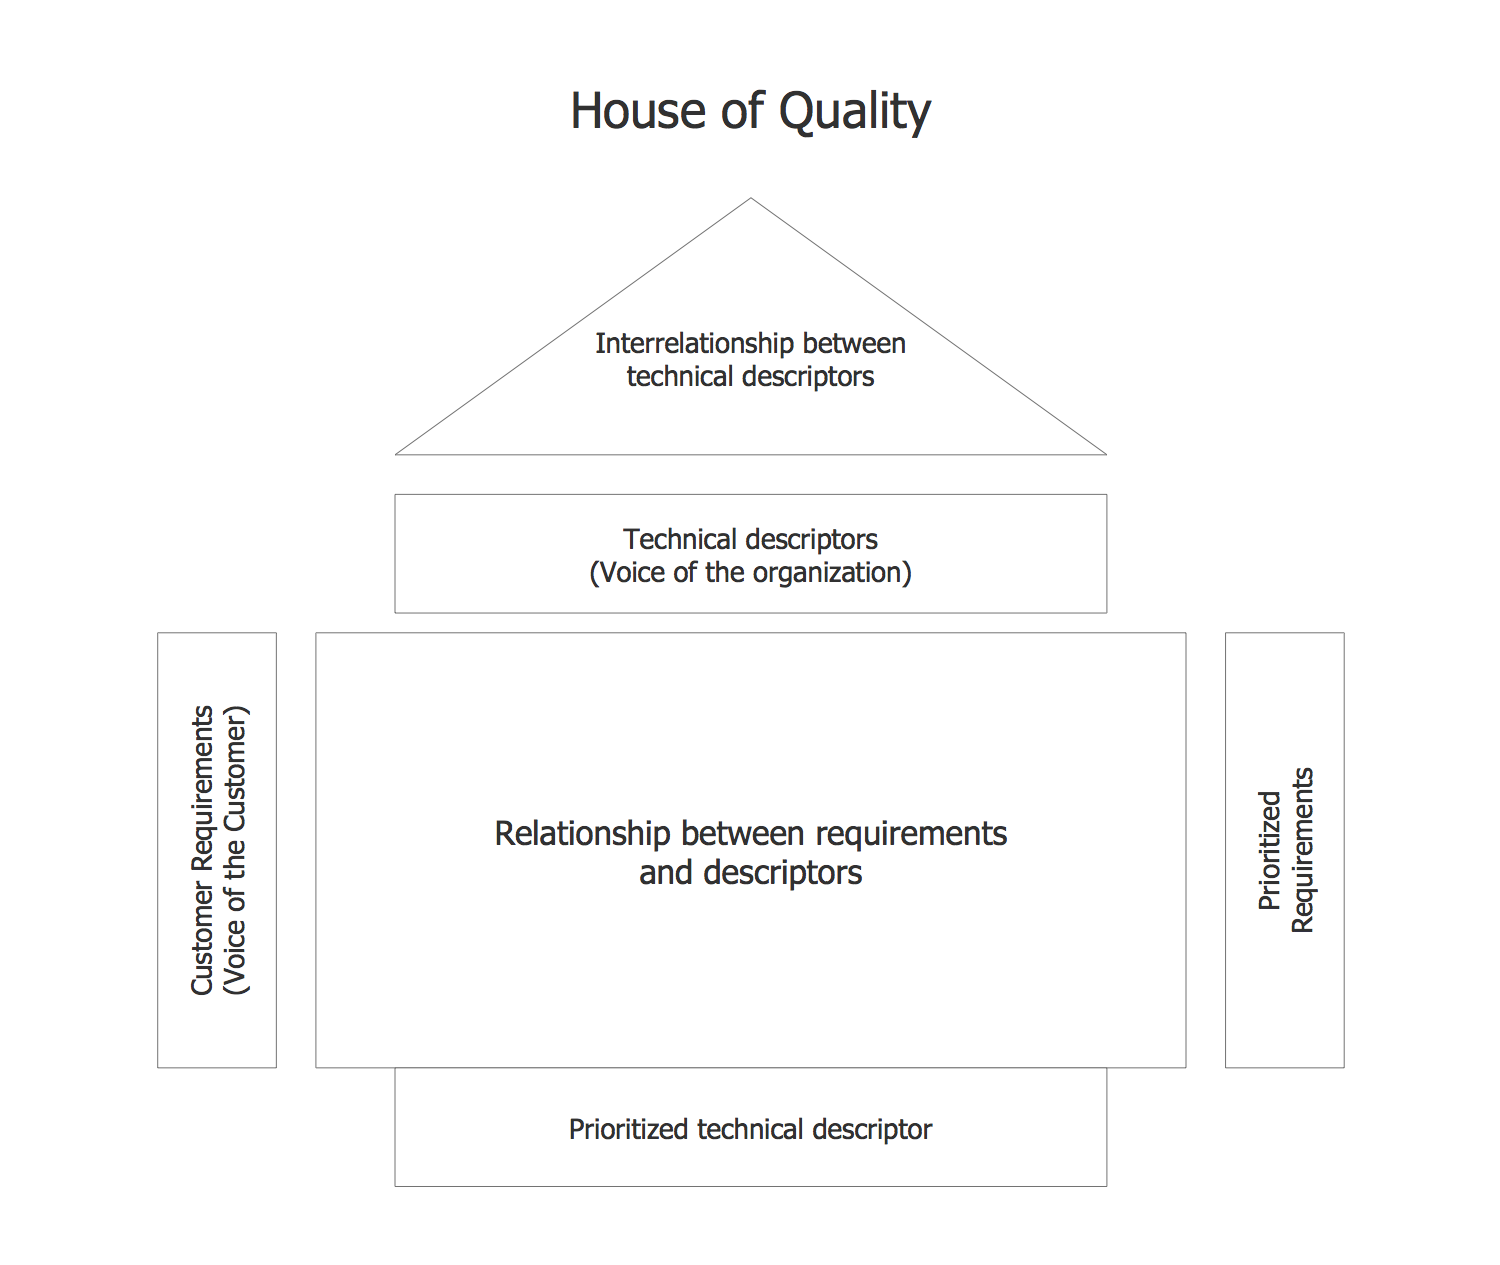 House of Quality (HOQ)